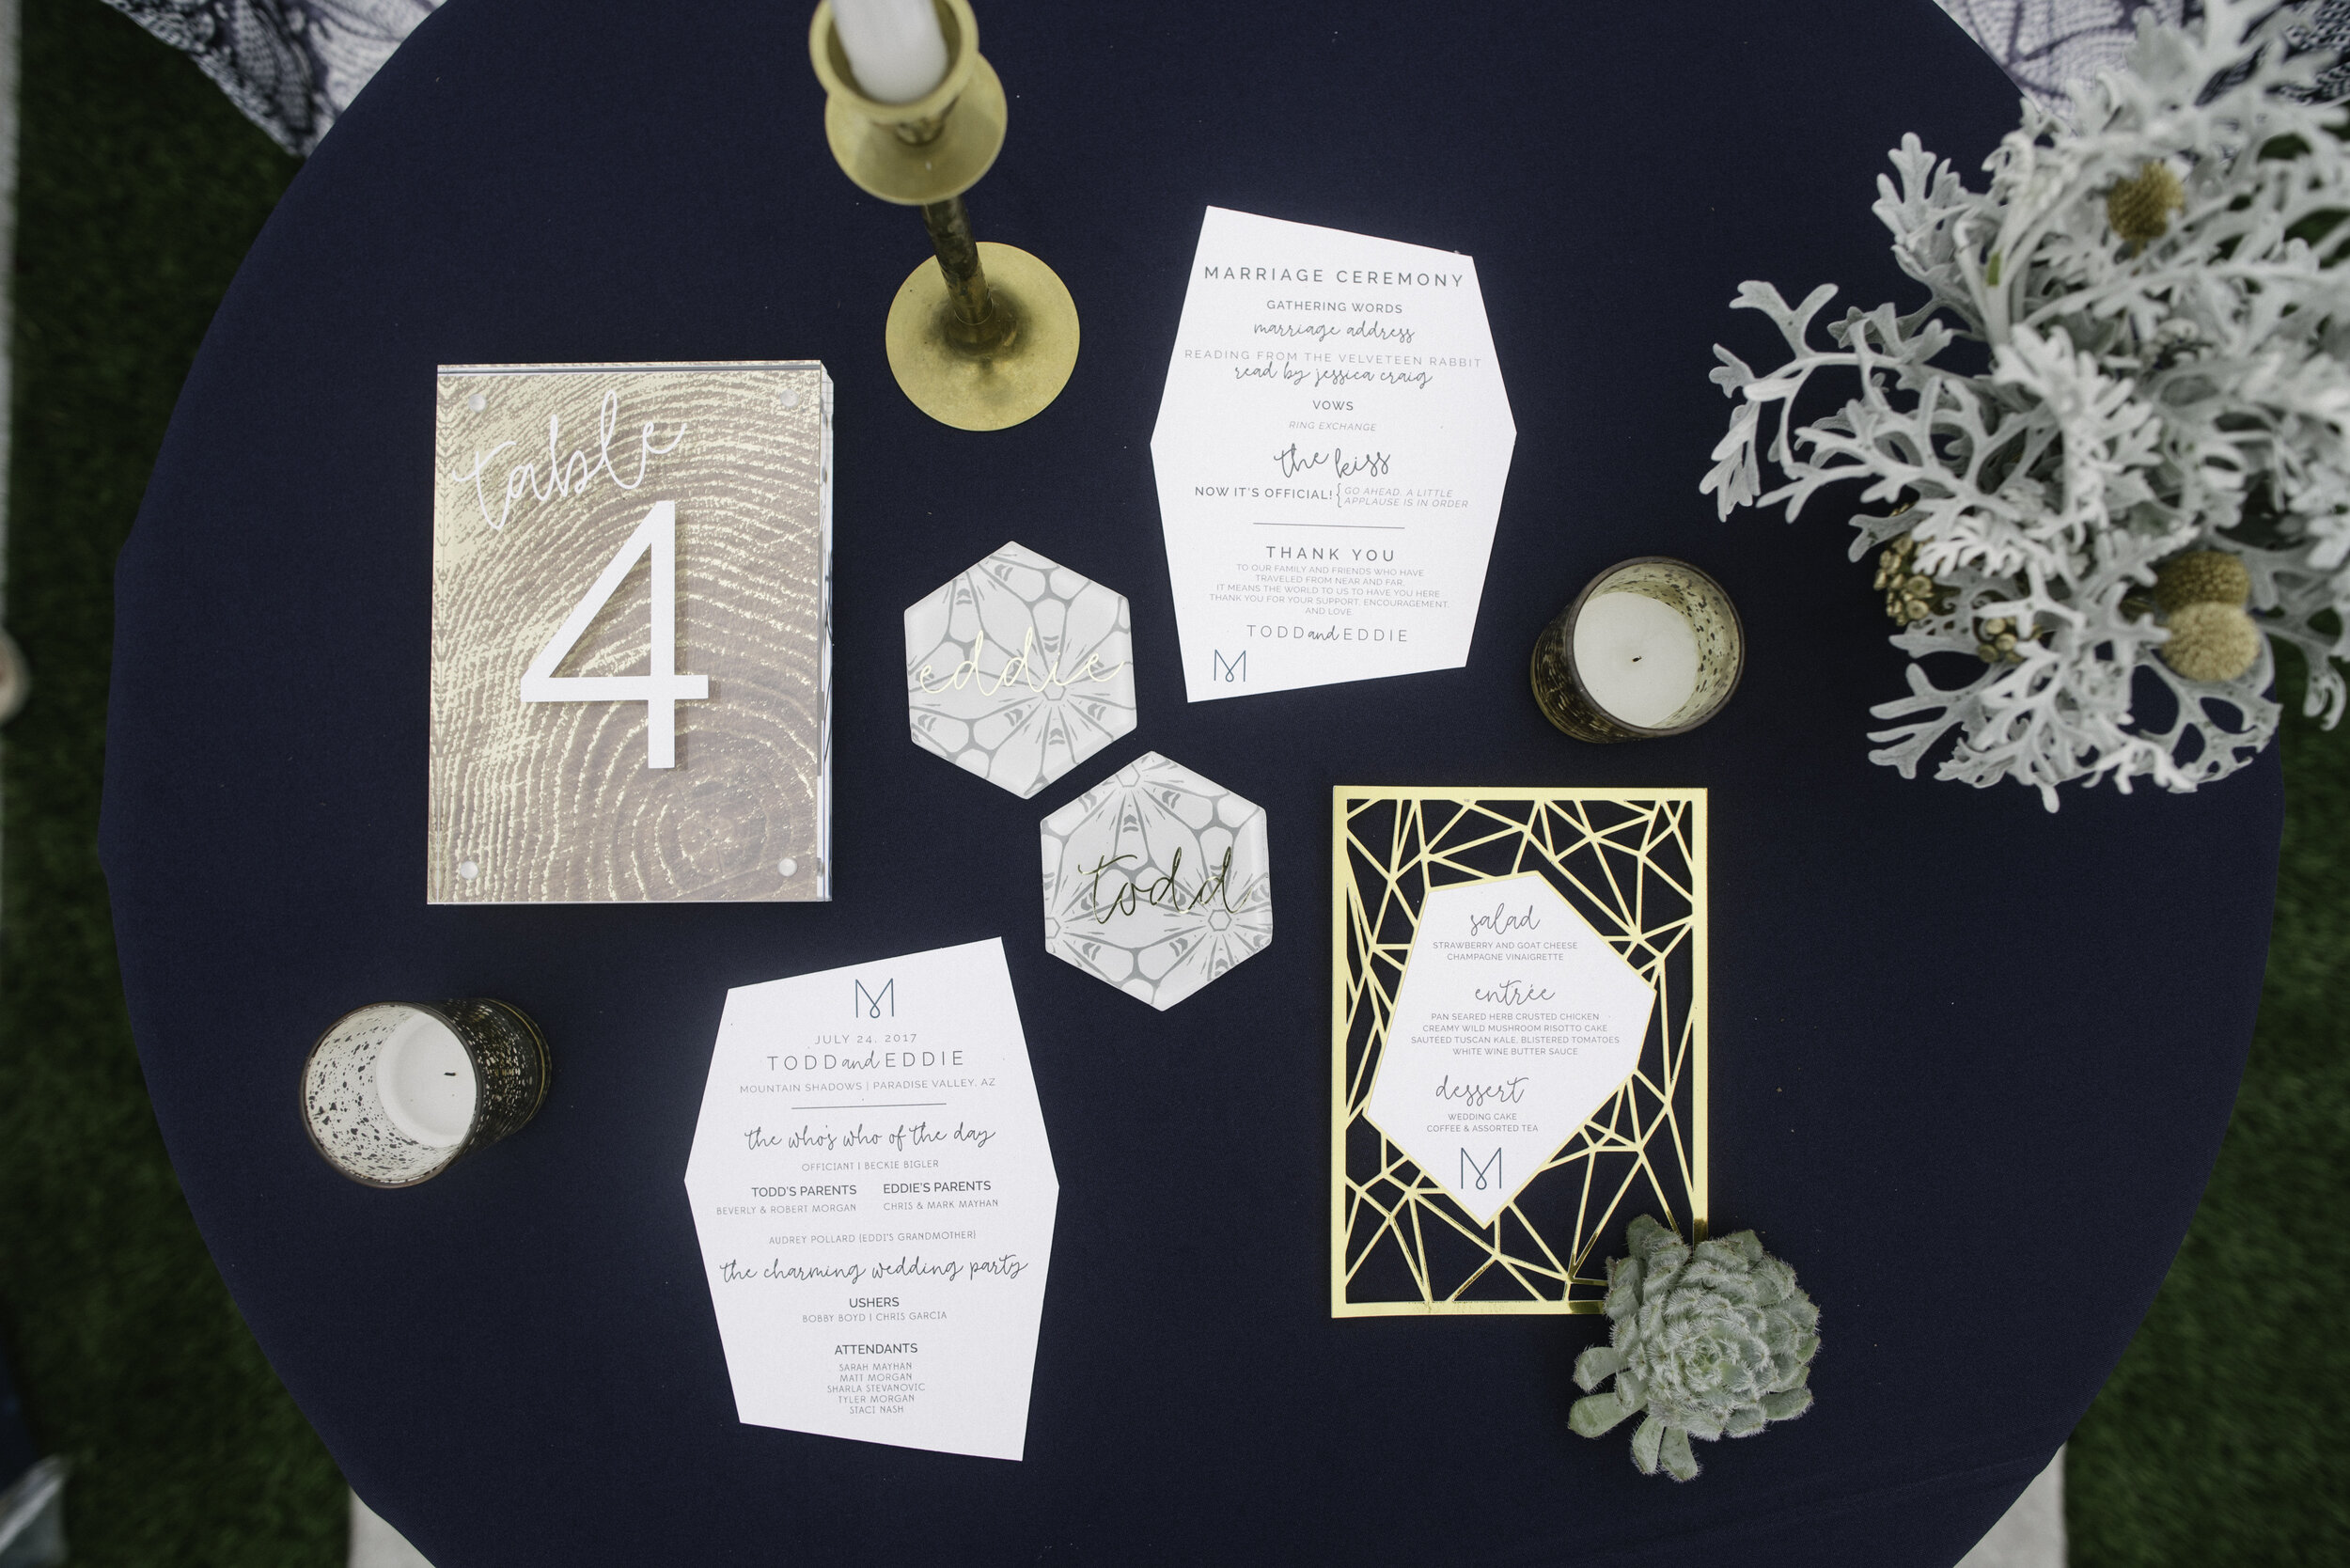 1 wedding details wood table number gold and white menu gold and white name cards for tables simple wedding invites Keith and Melissa Photography Life Design Events.jpg